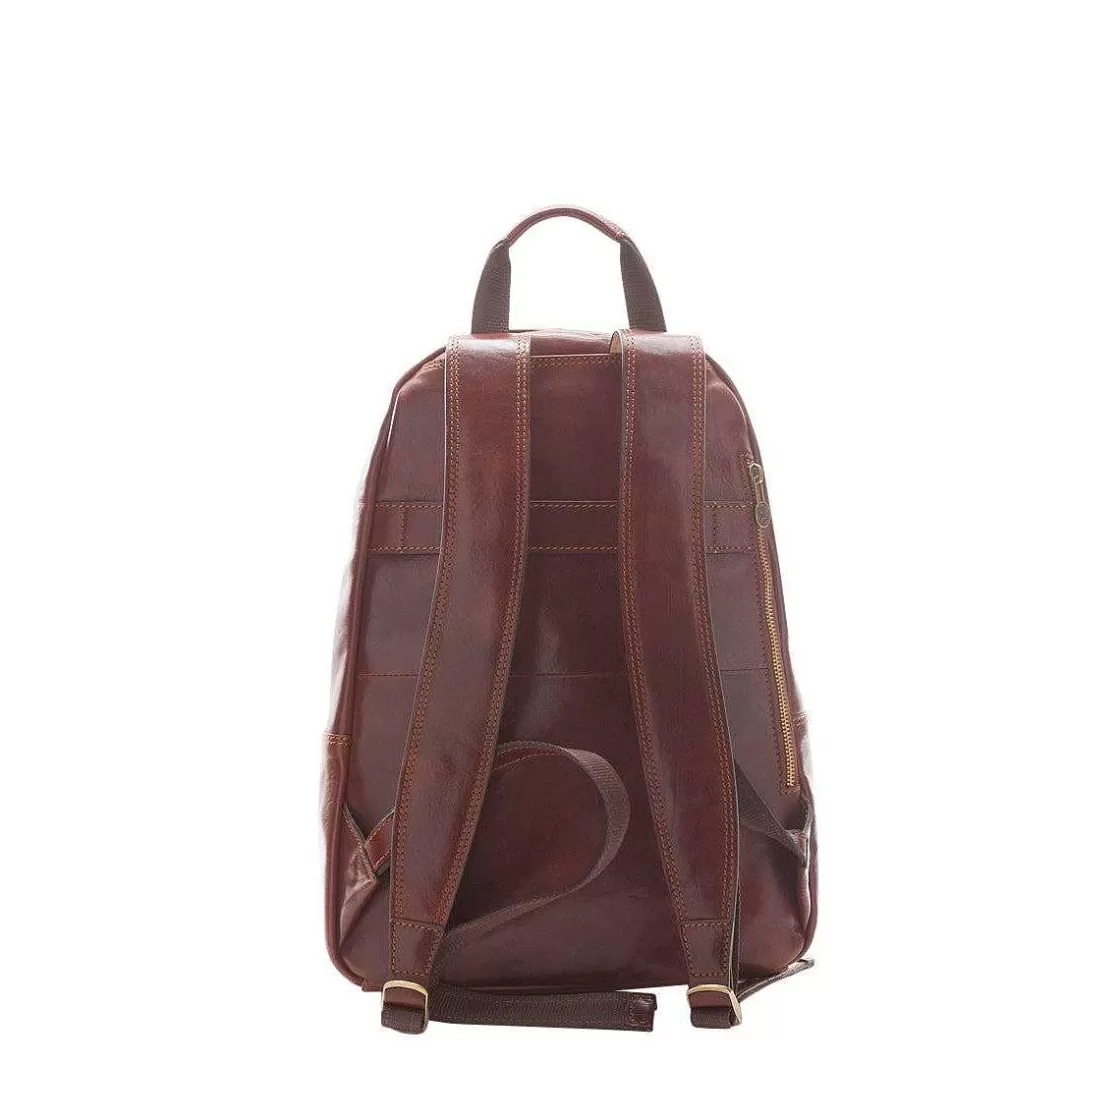 Leonardo Classic Backpack In Full Grain Leather With Zipper Adjustable Straps Front Pocket Available In Various Colors Online